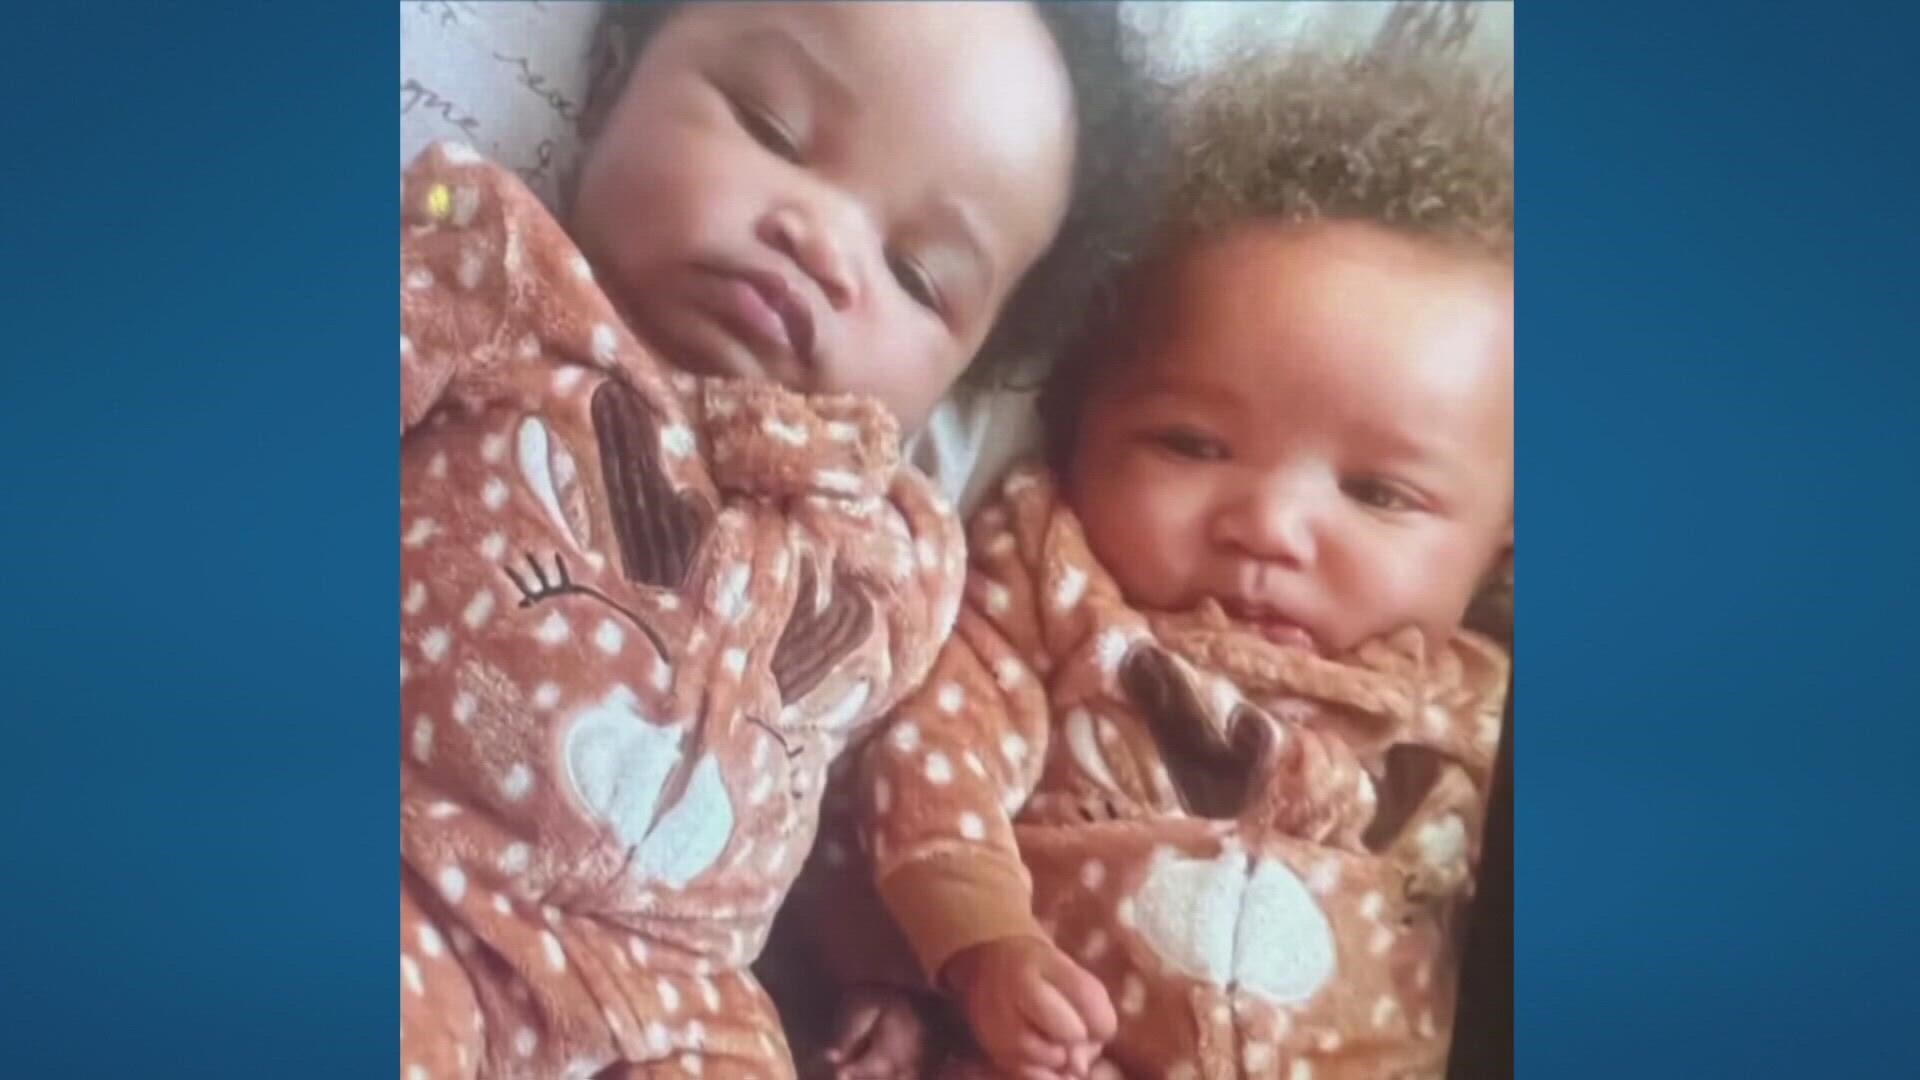 Six-month-old Kyair Thomas died late Saturday, according to Columbus, Ohio police, who are investigating his death as a homicide.